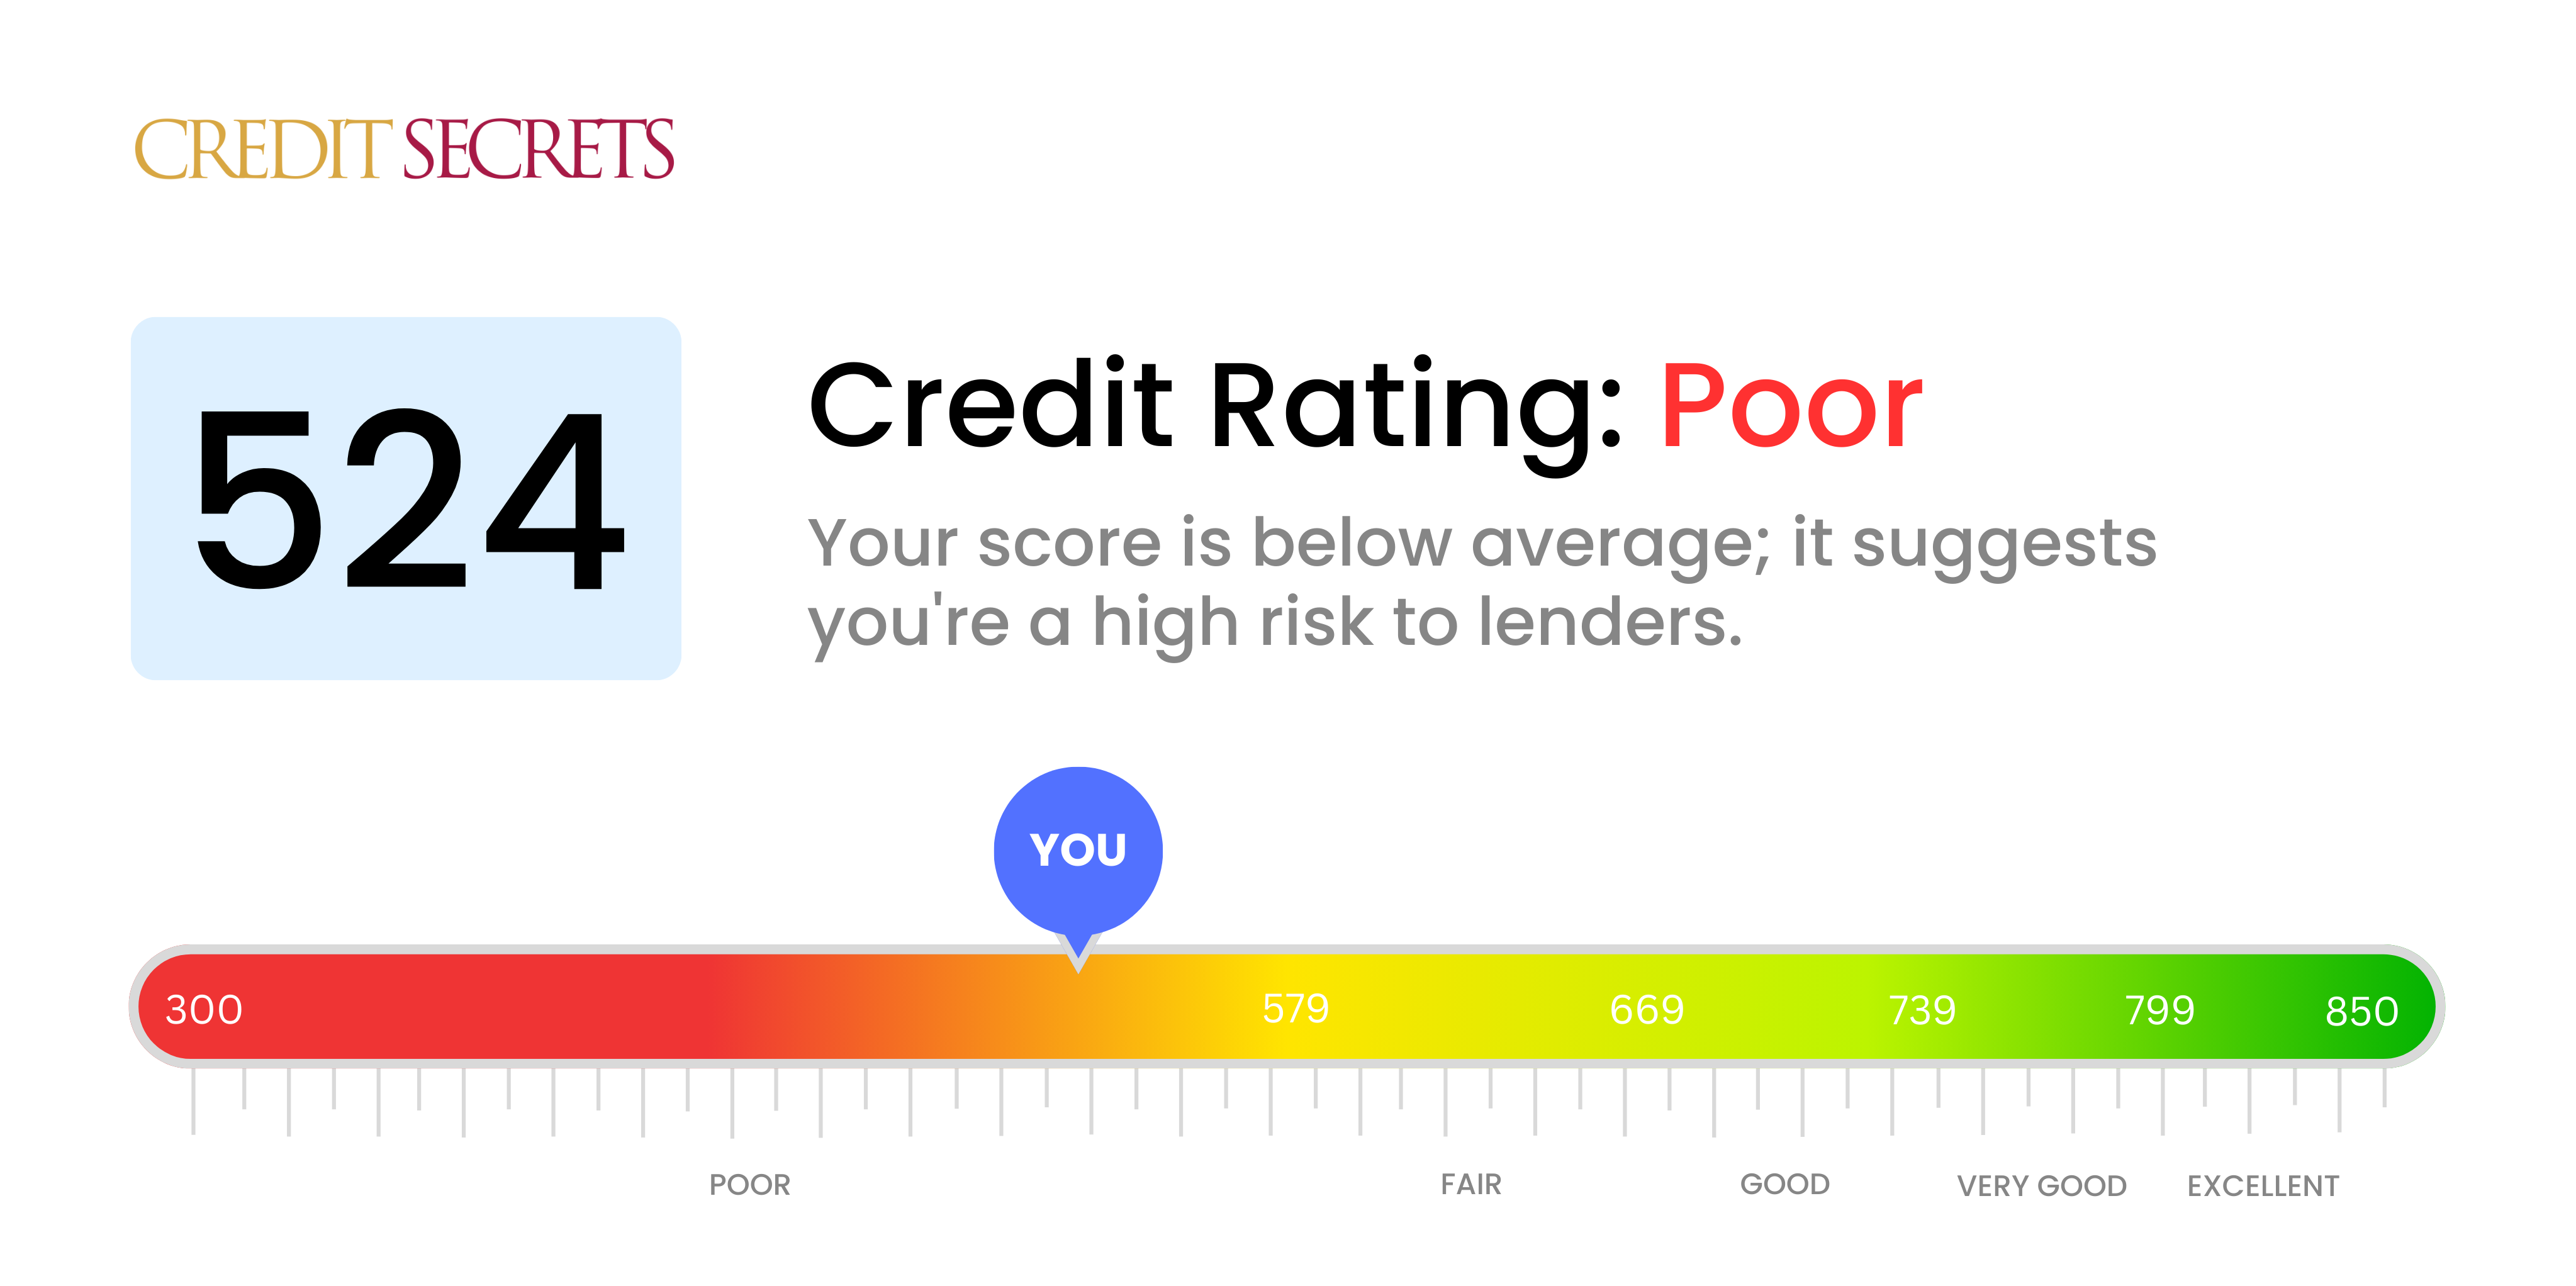 Is 524 a good credit score?